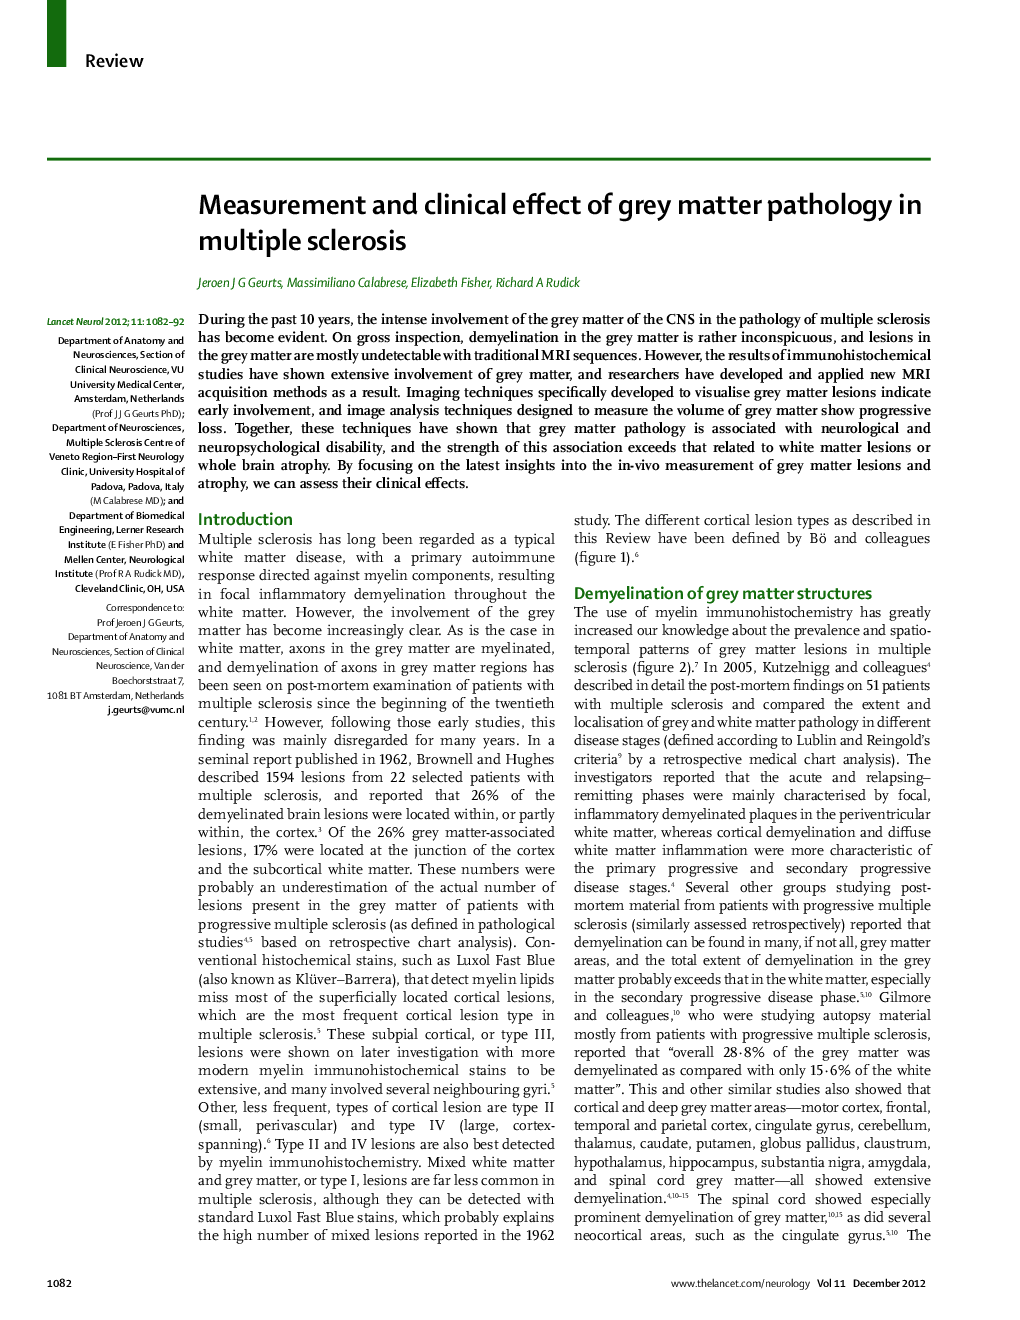 Measurement and clinical effect of grey matter pathology in multiple sclerosis